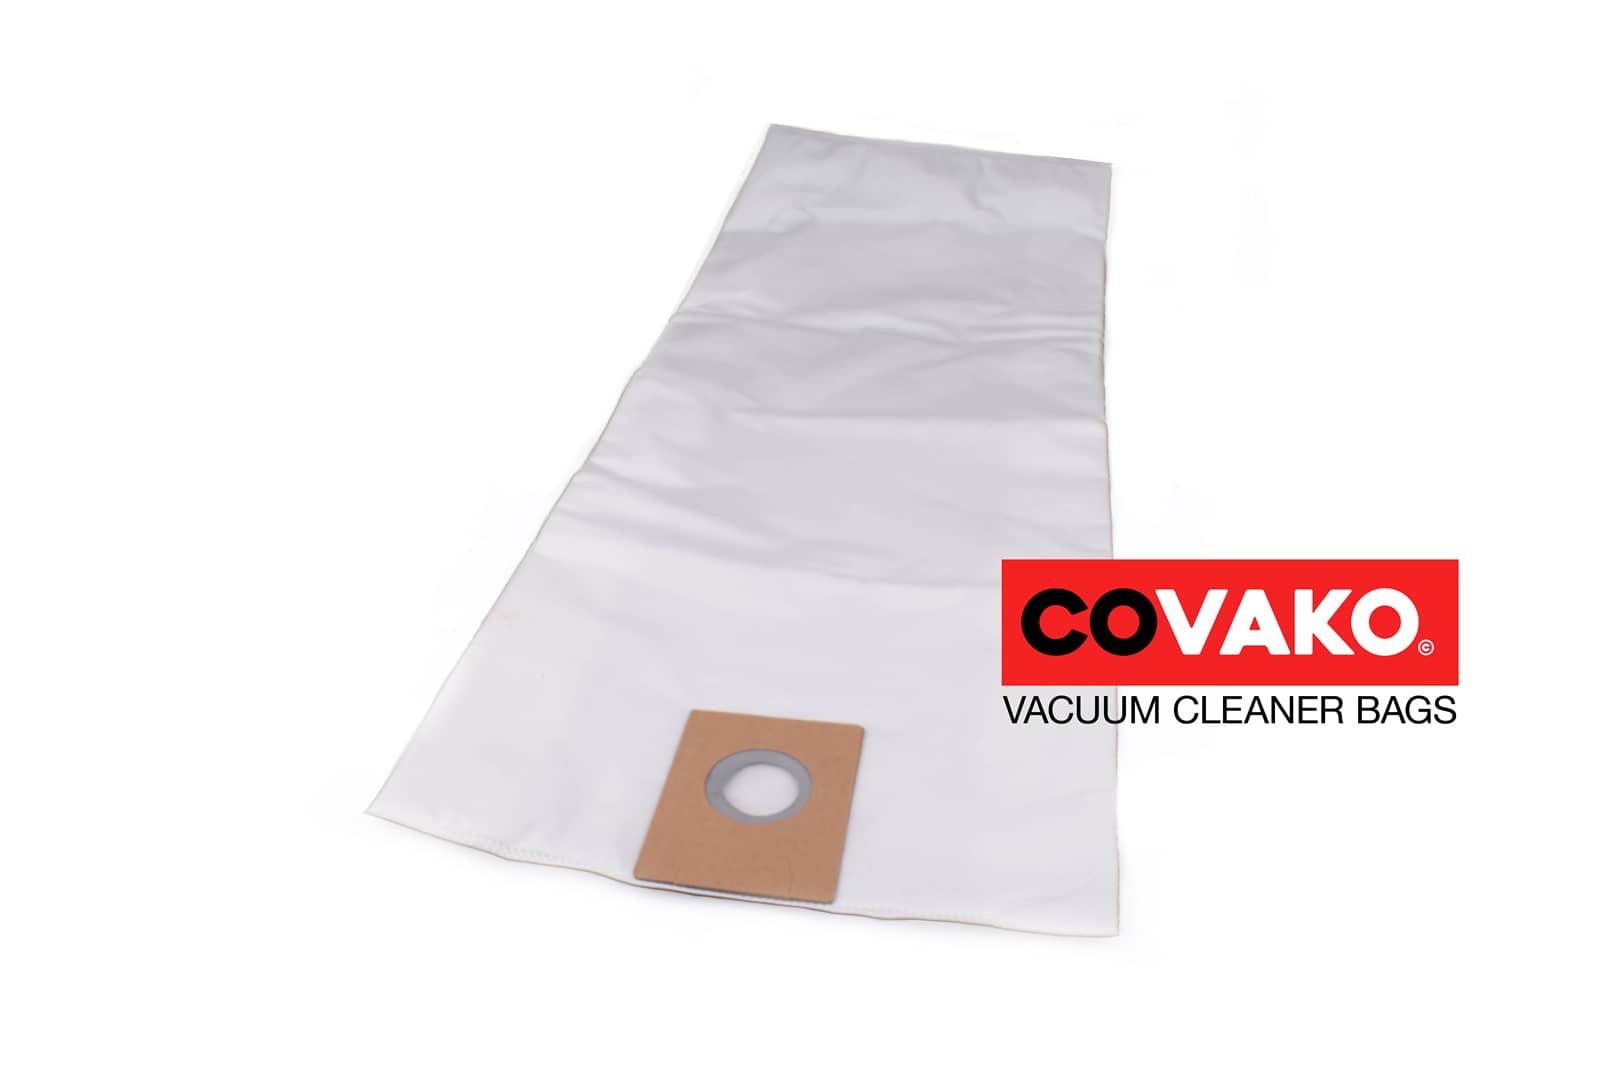 Viper LSU 255 P / Synthesis - Viper vacuum cleaner bags